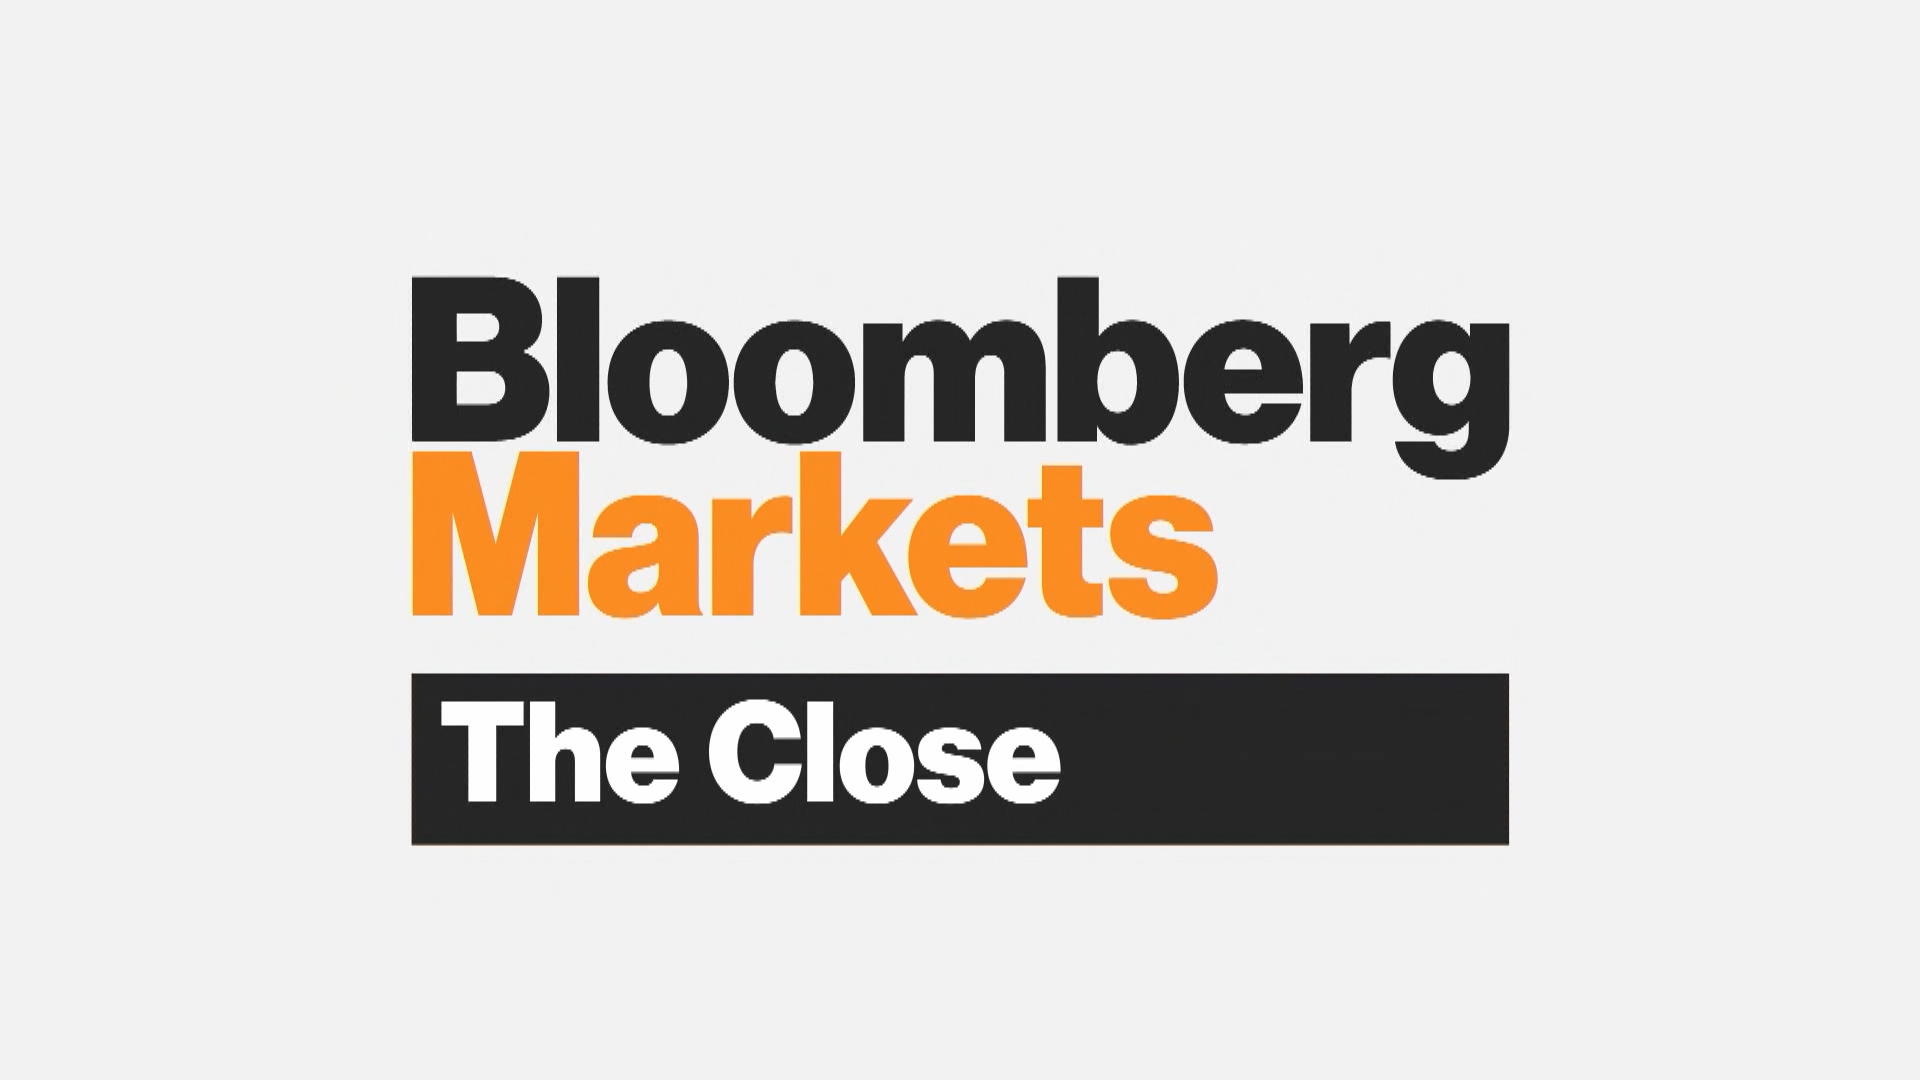 Bloomberg Markets The Close Full Show 10 16 2018 Bloomberg Images, Photos, Reviews